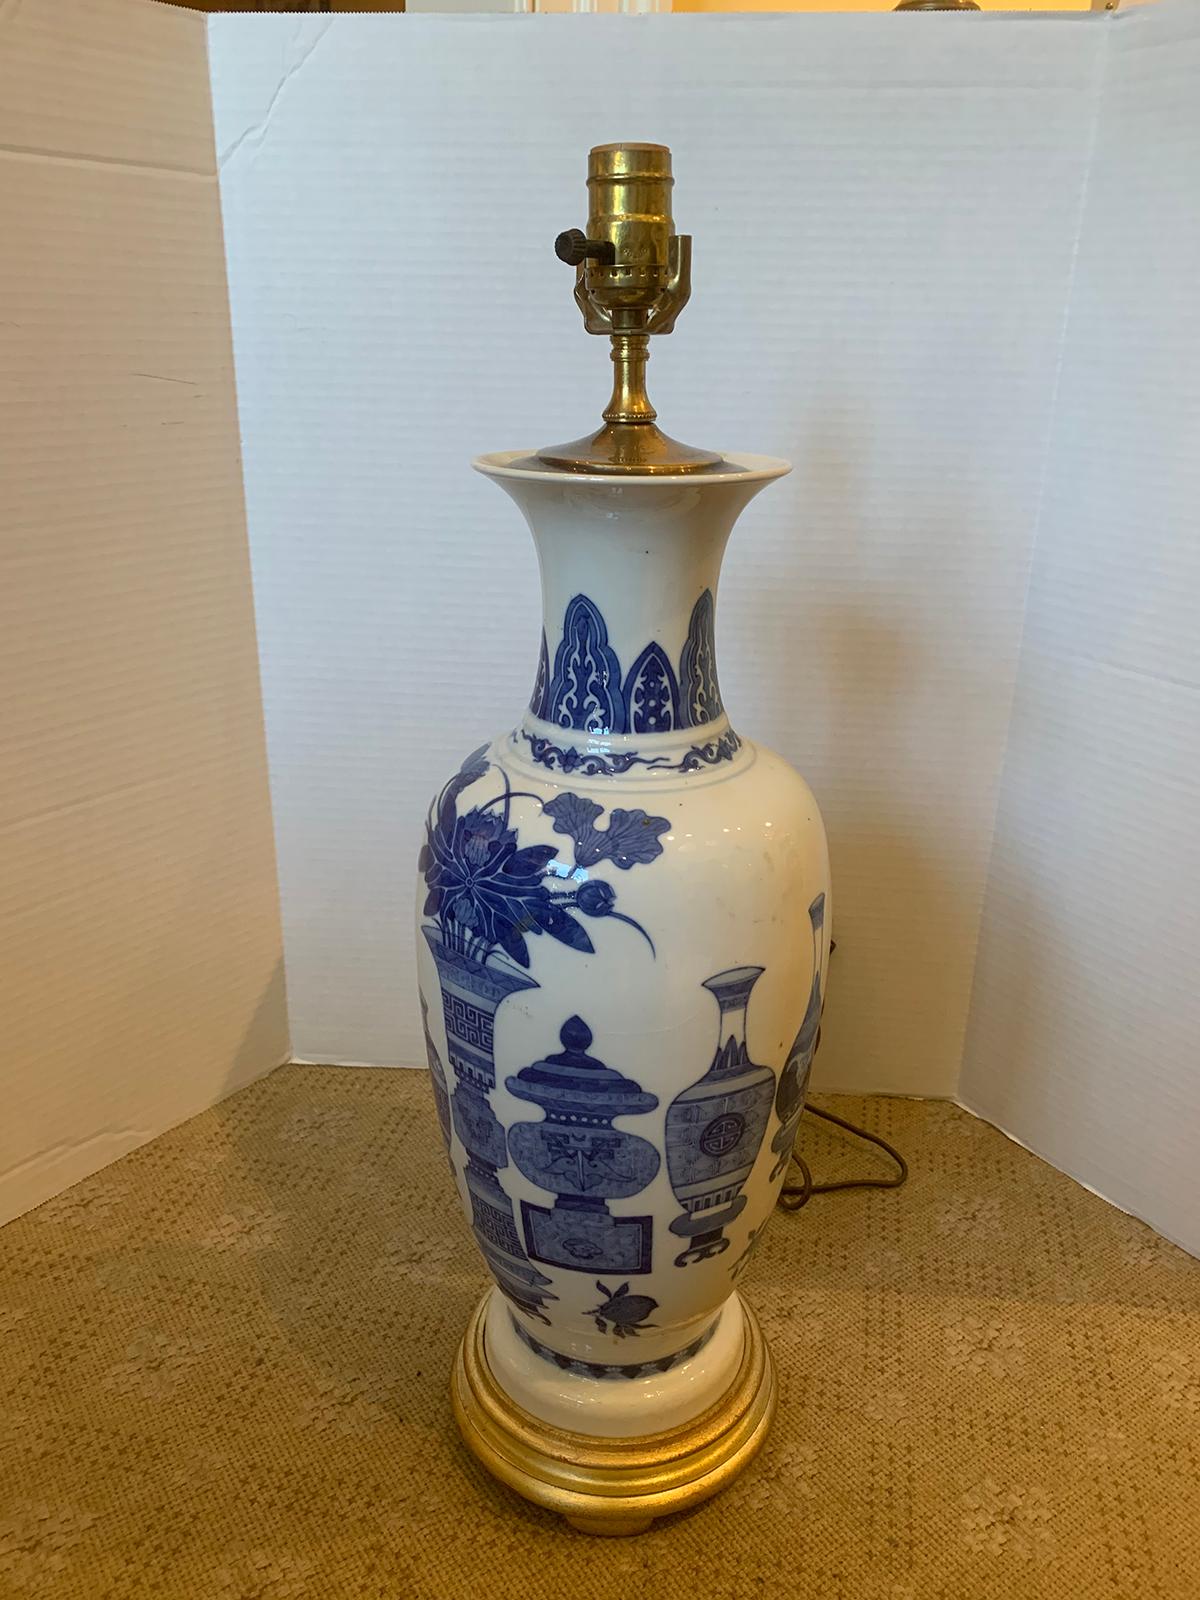 19th-20th Century Blue and White Porcelain Lamp from Estate of D. Byers In Good Condition For Sale In Atlanta, GA